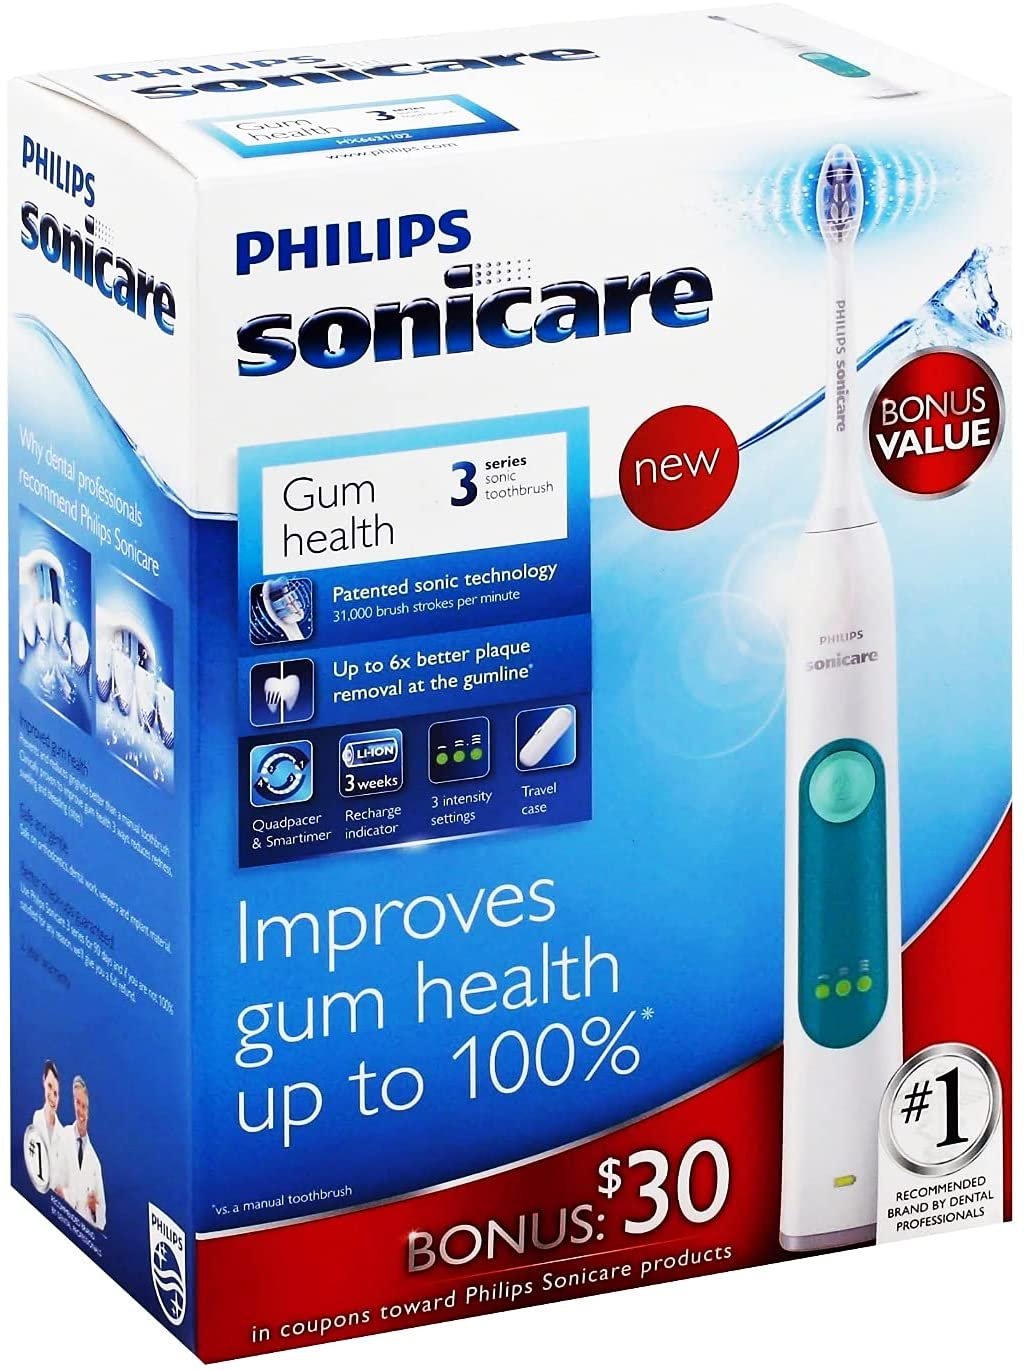 Philips Sonicare® Electric Toothbrush Bundle with Smoocu Case and Charging Dock - Sonic Whitening Toothbrush with Smart Timer and 3 Intensity Settings - Orthodontics and Veneers-Safe